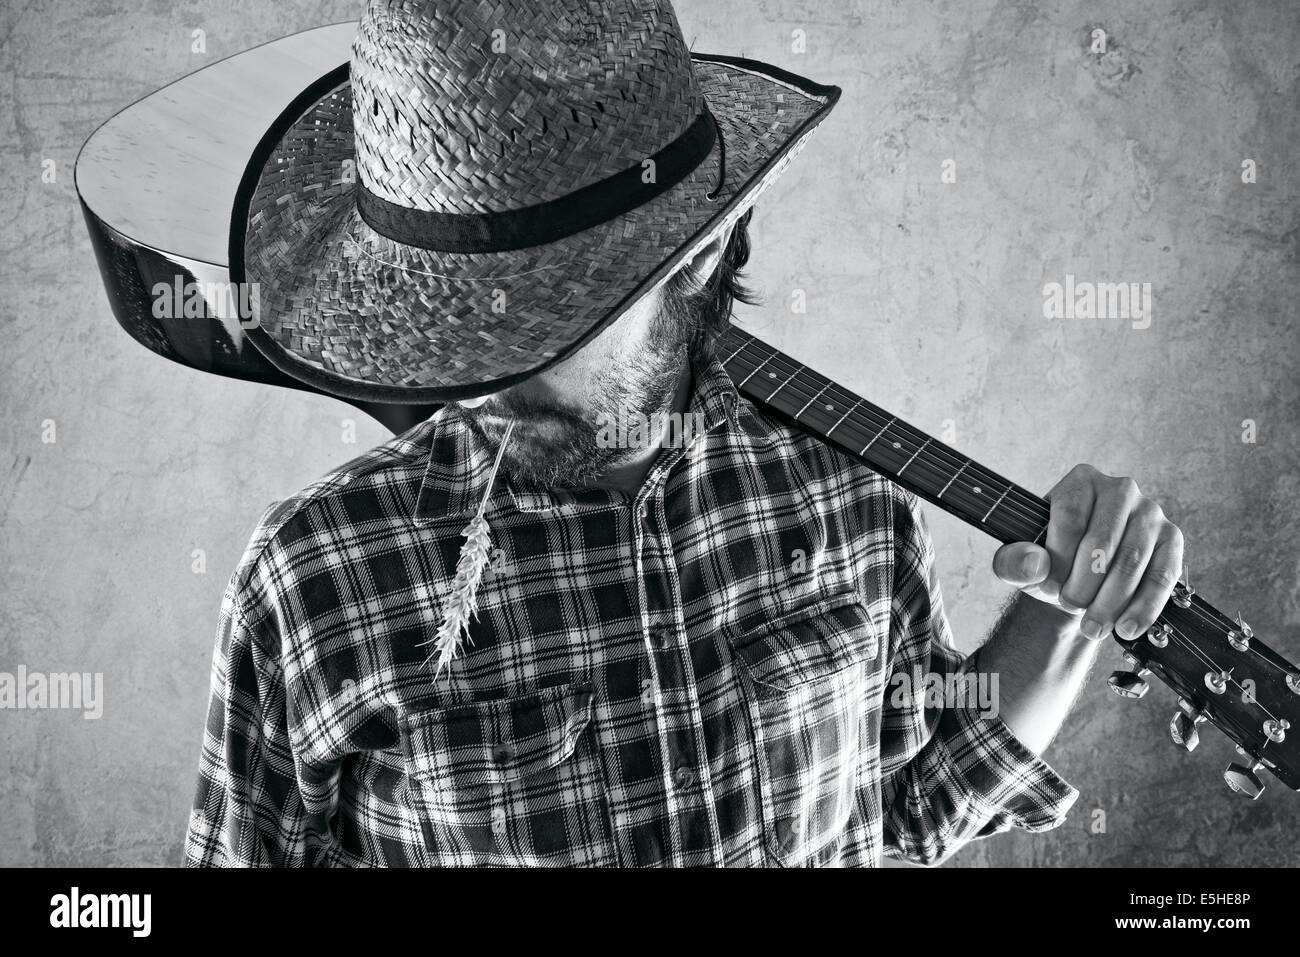 Western country cowboy musician with guitar, black and white portrait. Stock Photo